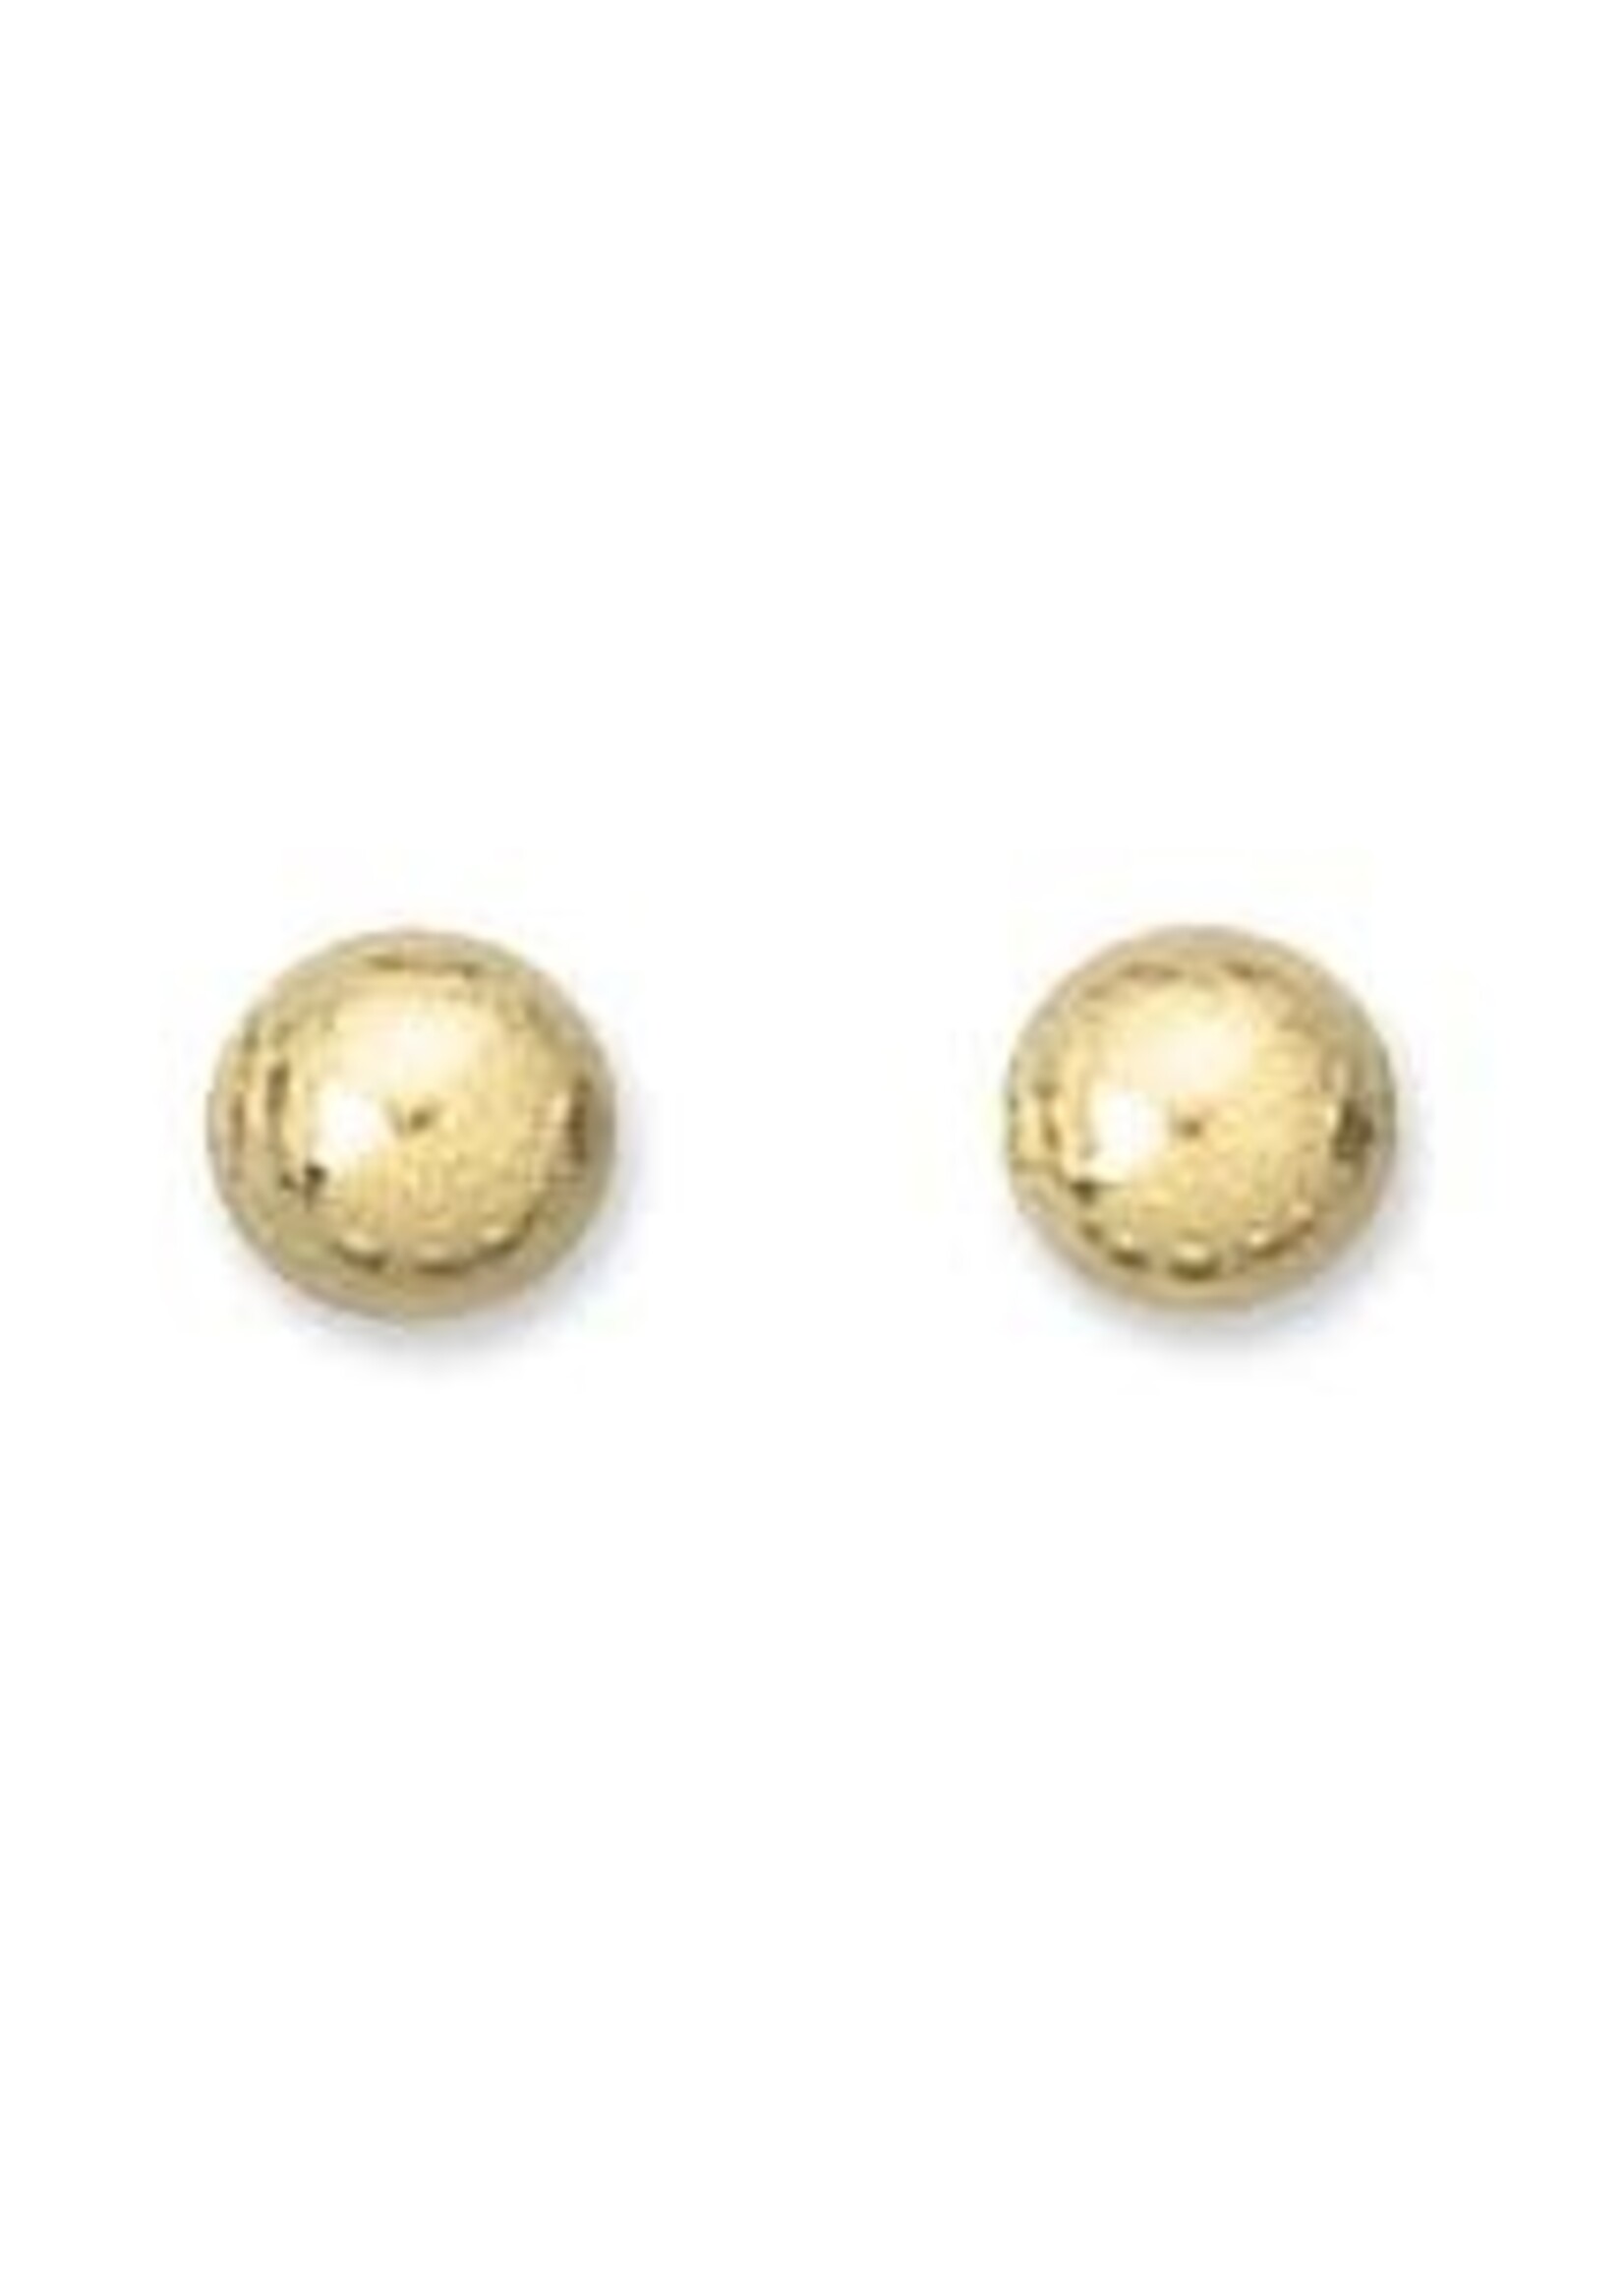 4mm Round Bead Gold Plate Qty 24